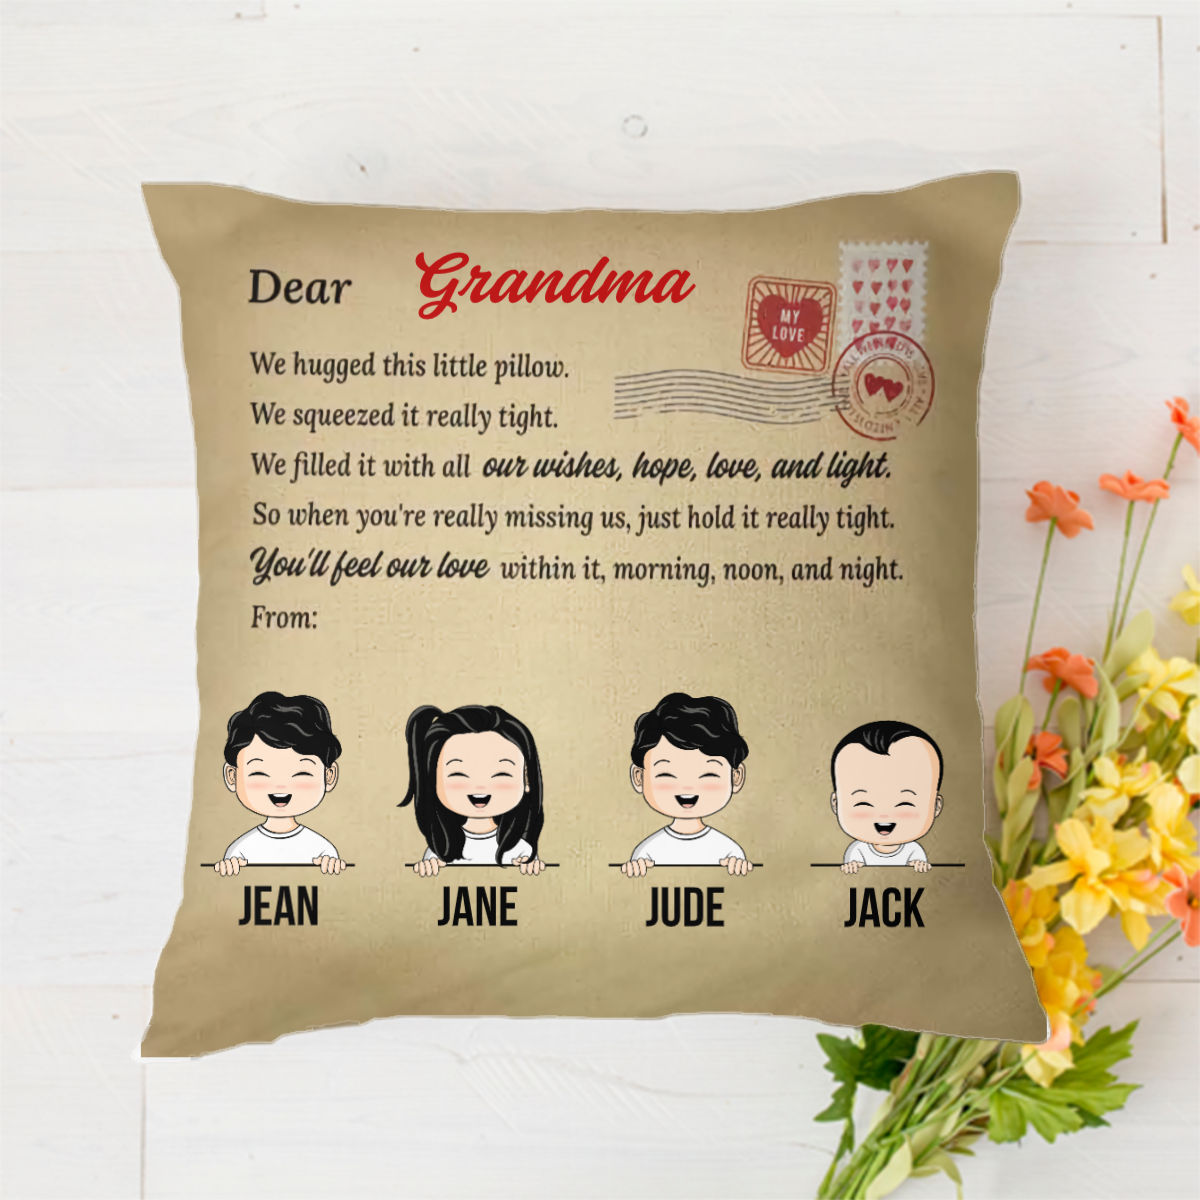 Grandma You'll Feel Our Love Within It - Gift For Mother Grandma Aunt - Personalized Custom Pillow